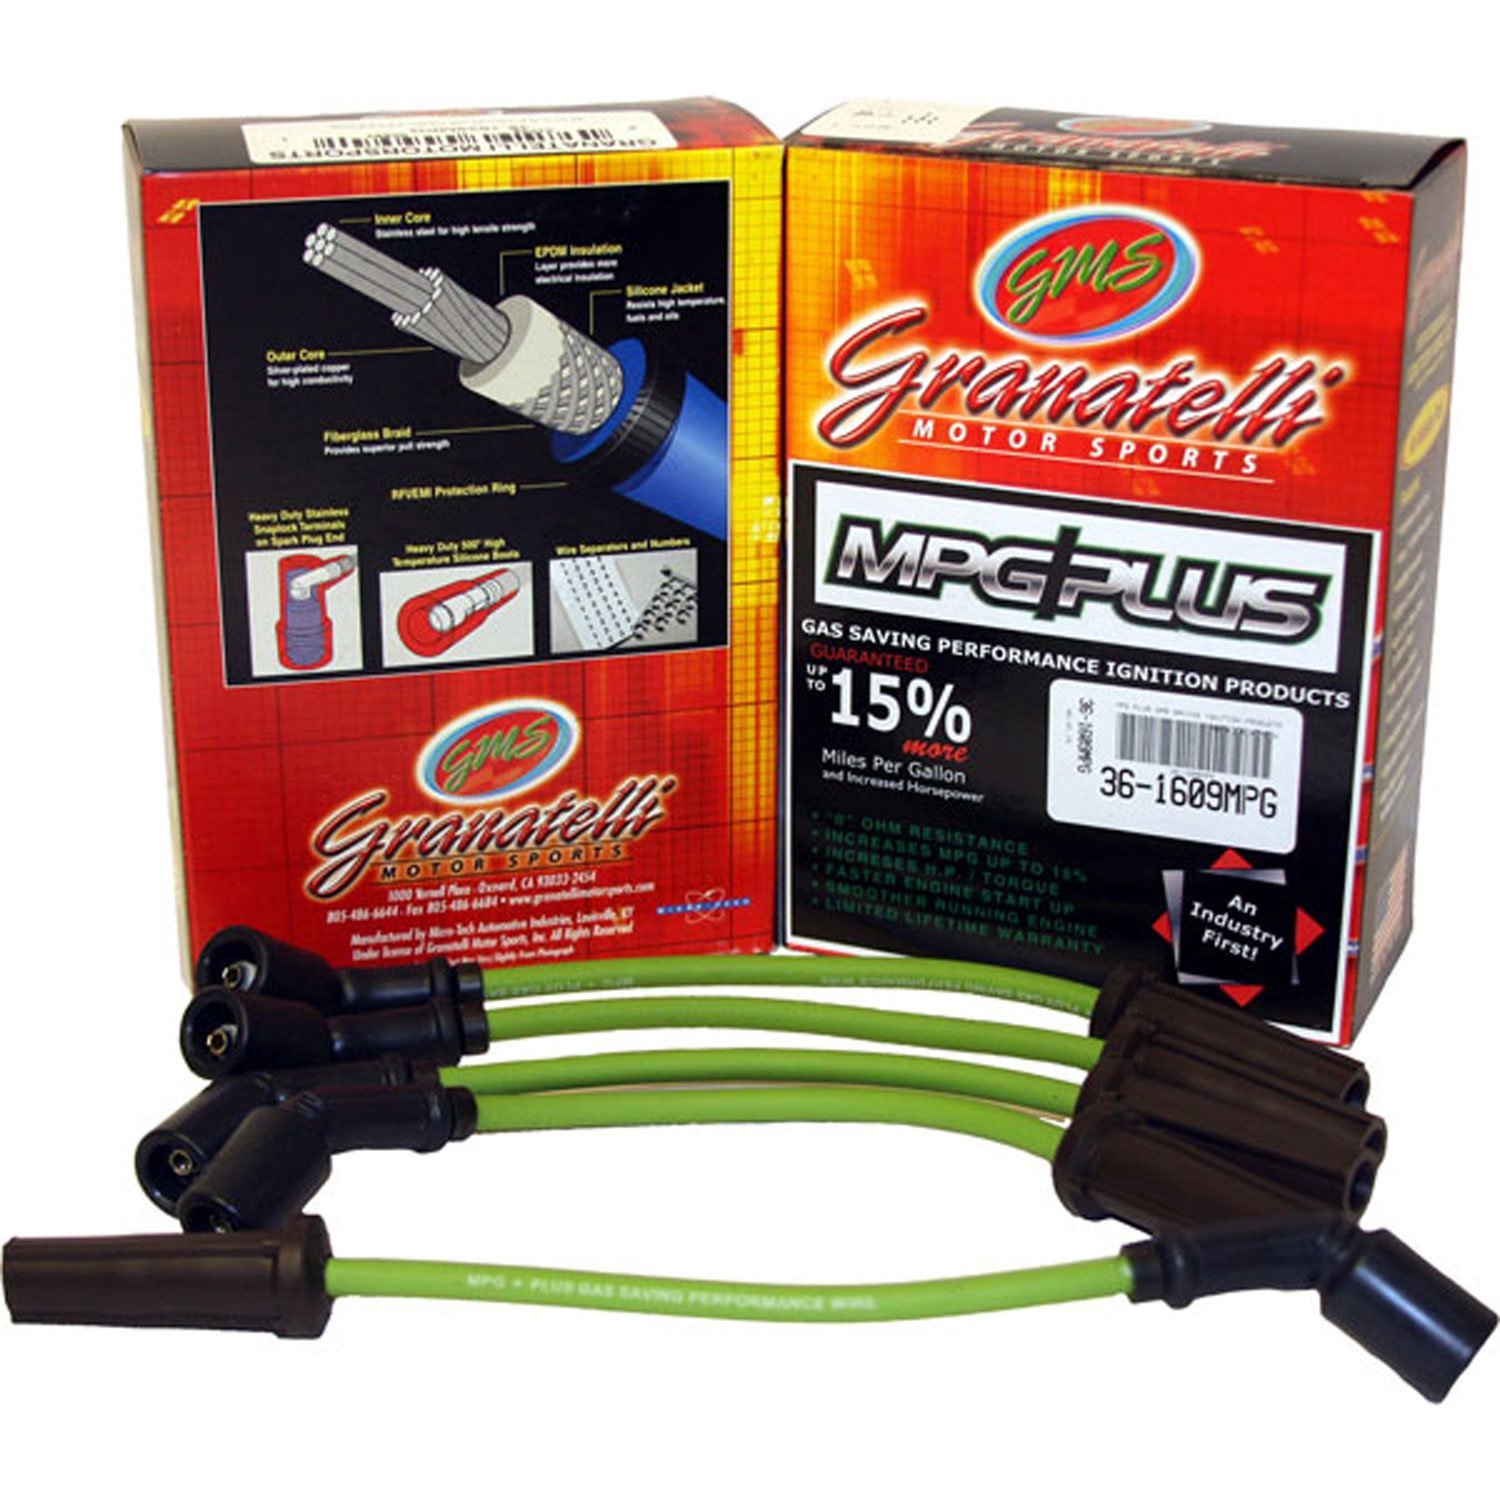 MPG Wires MAZDA RX SERIES 2CYL 1.3L 93-96